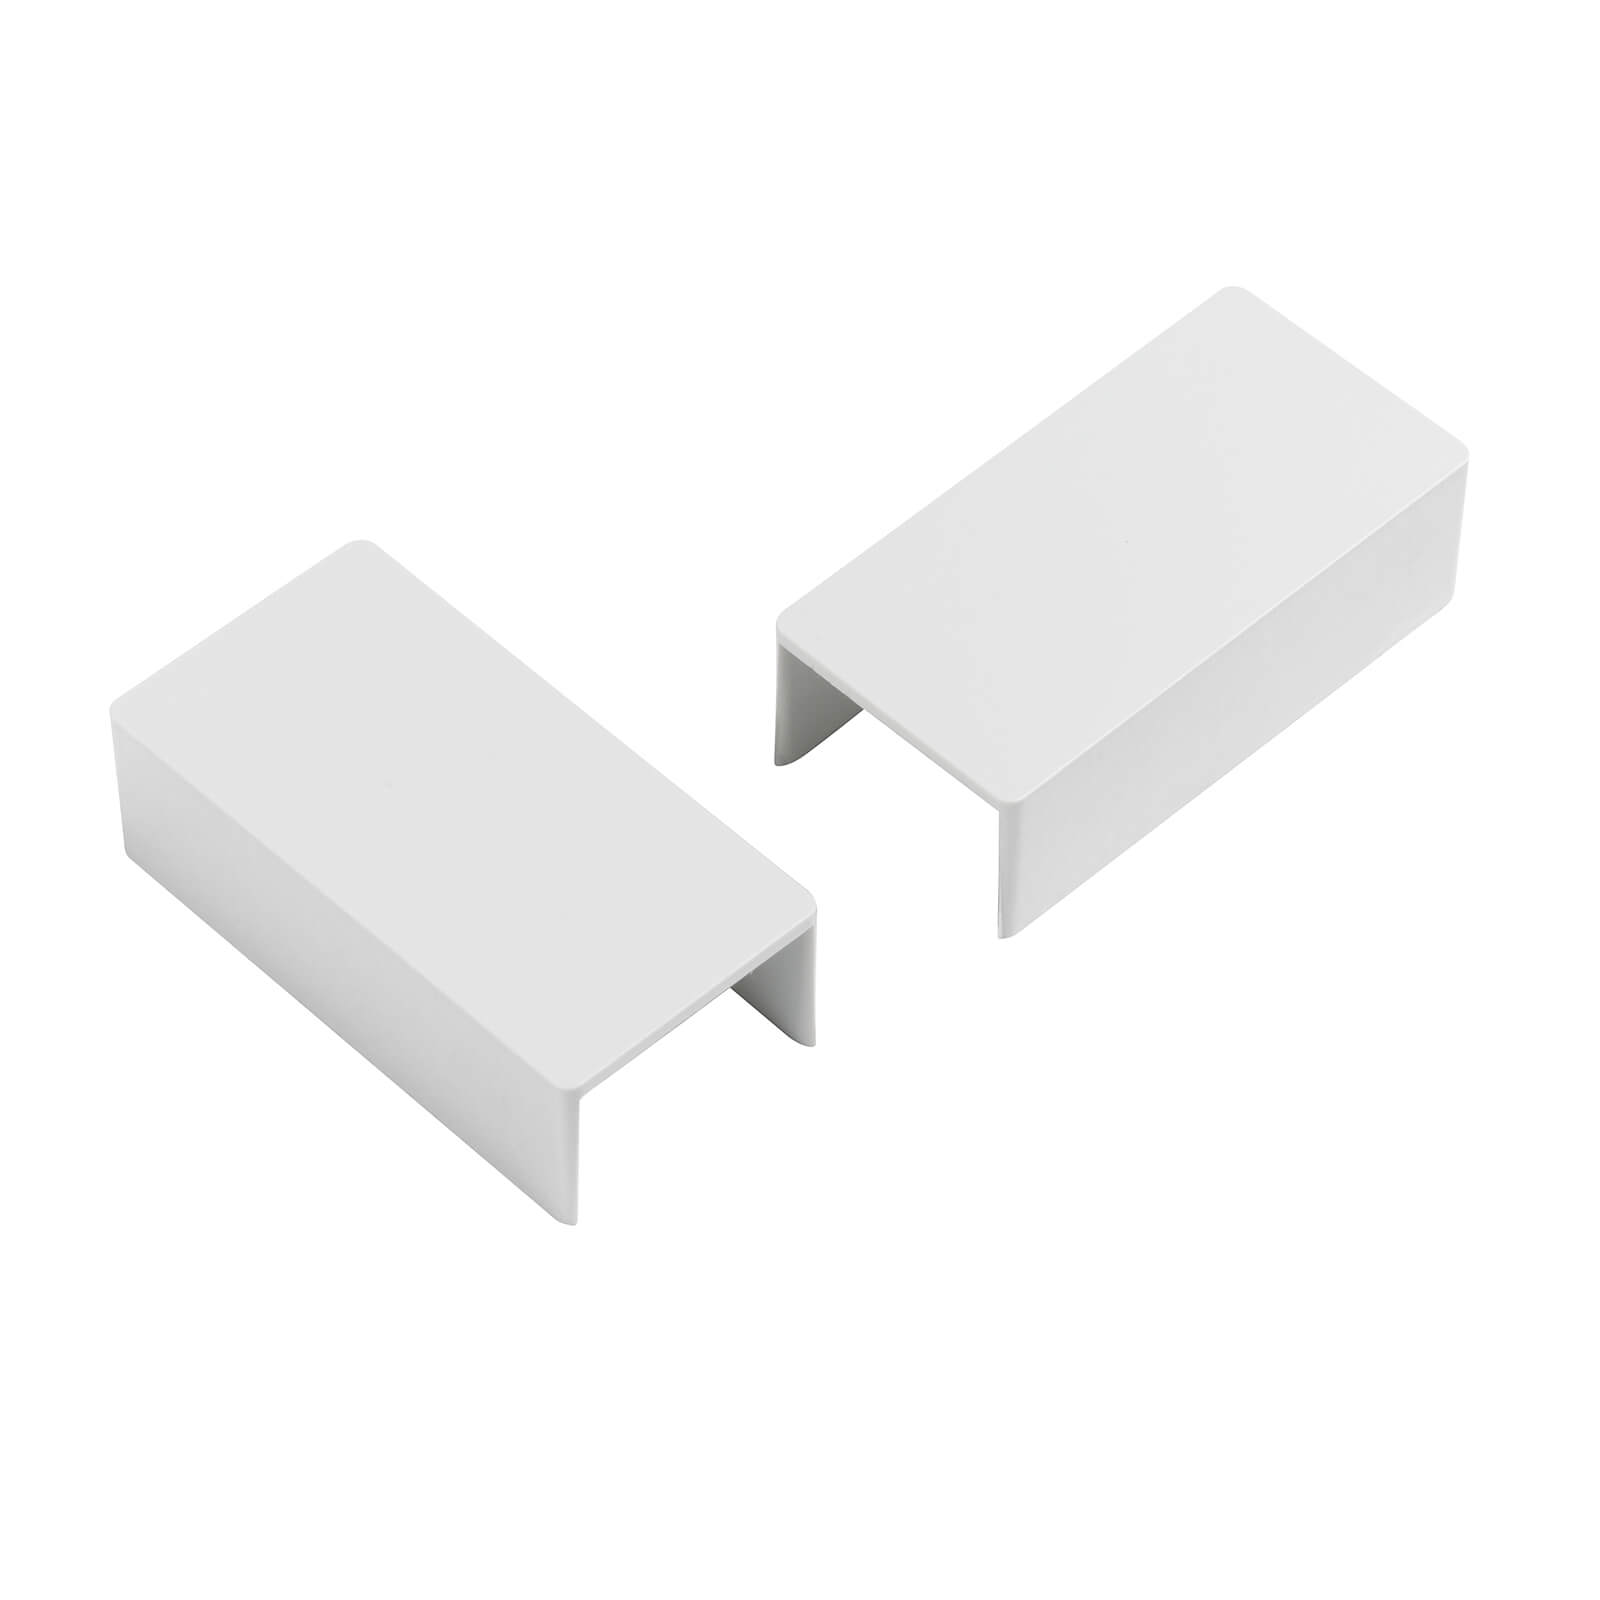 Photo of D-line 25x16mm Trunking Clip-on Coupler 2 Pack - White